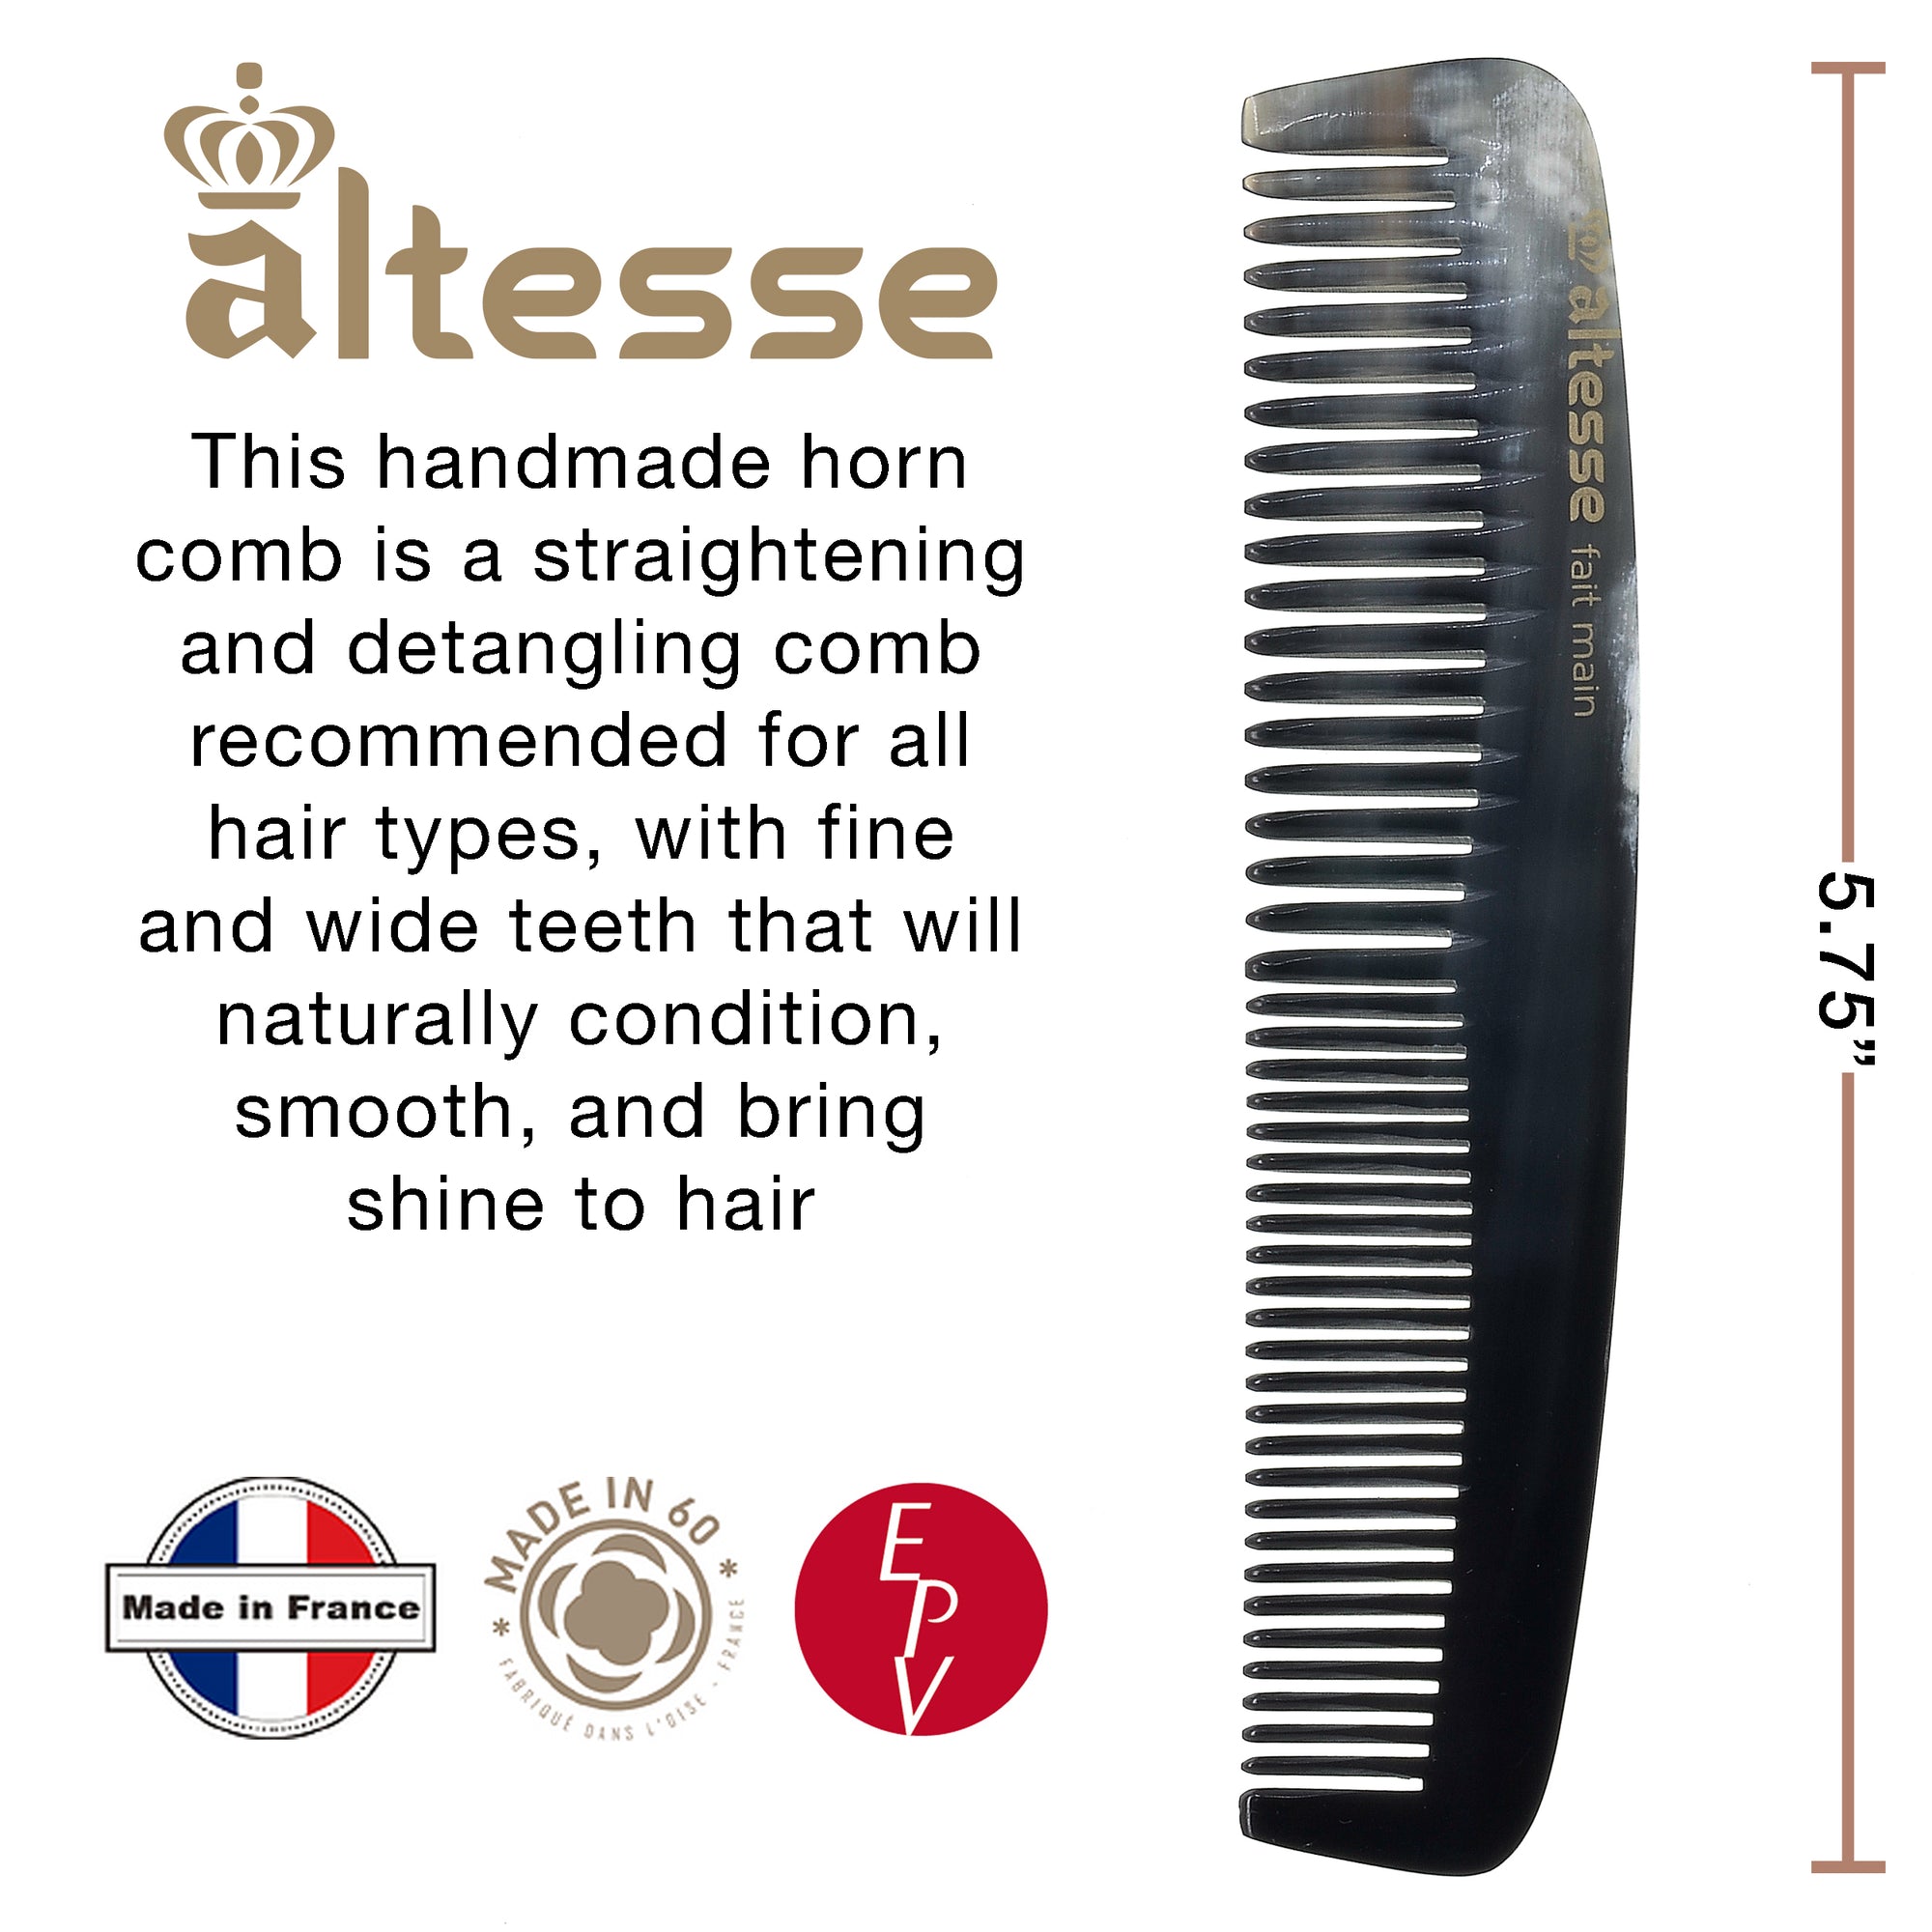 Altesse Antistatic Horn Comb with Smooth Rounded Teeth Handmade in France